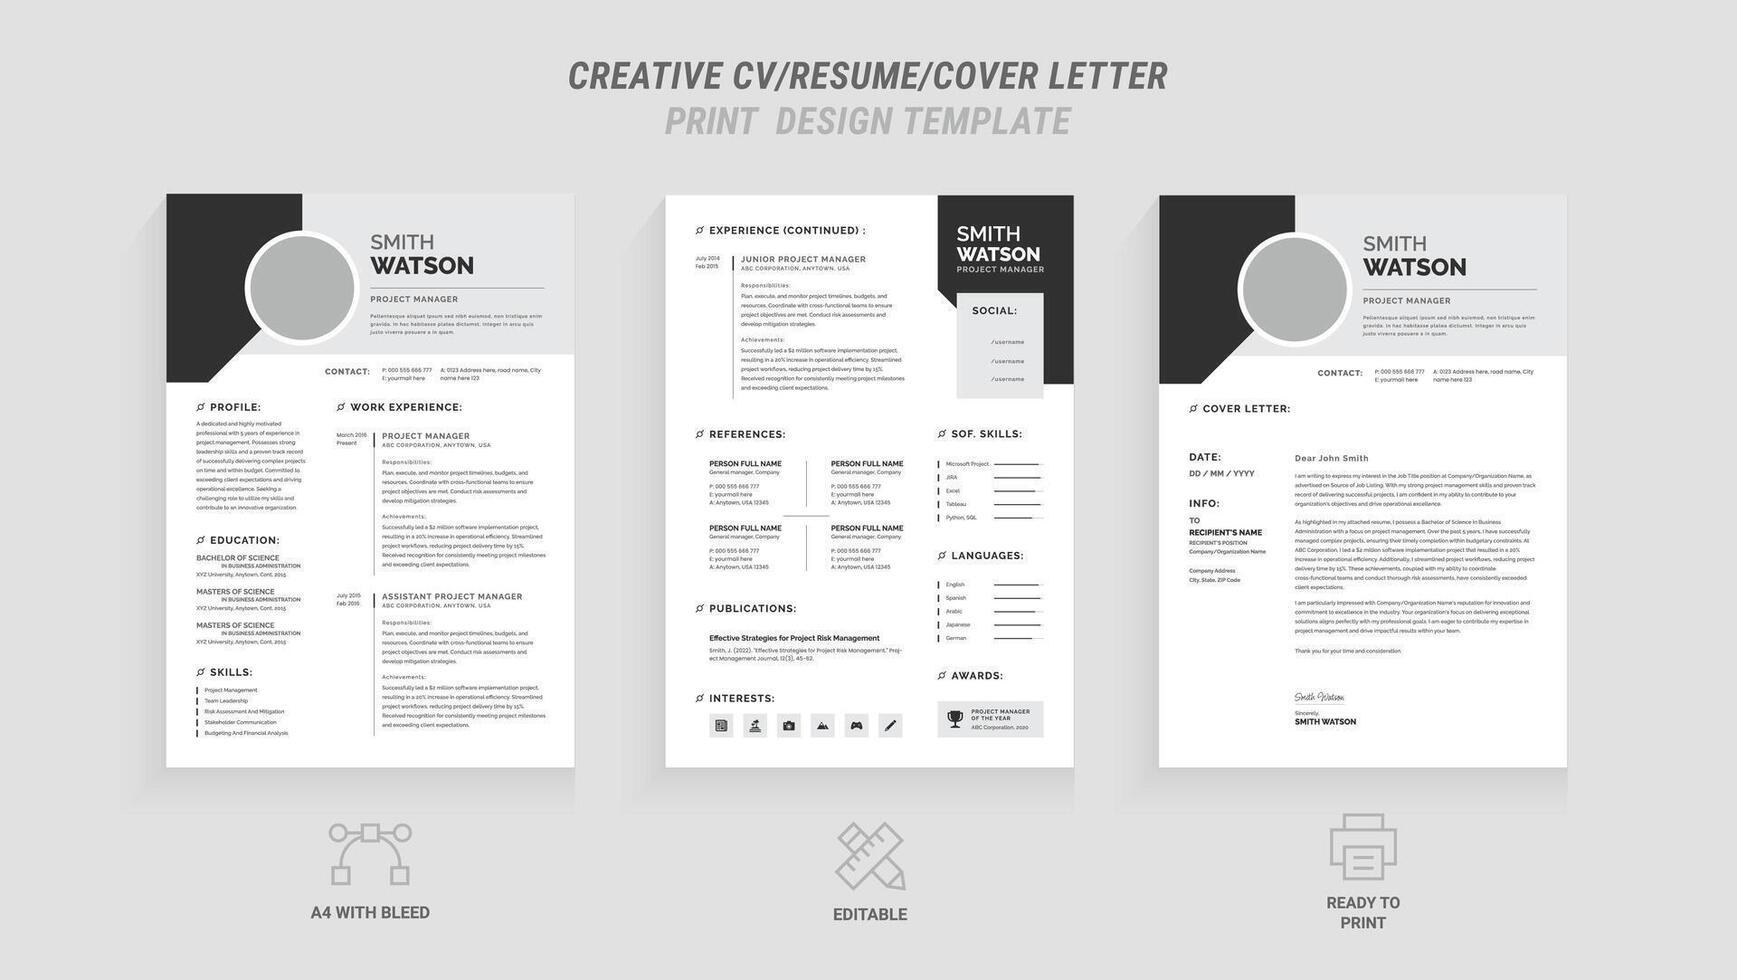 Present yourself professionally with our Minimal Resume, Cover Letter Page Set. Featuring a clean, modern design with a dark sidebar. Ideal for business job applications and multipurpos vector